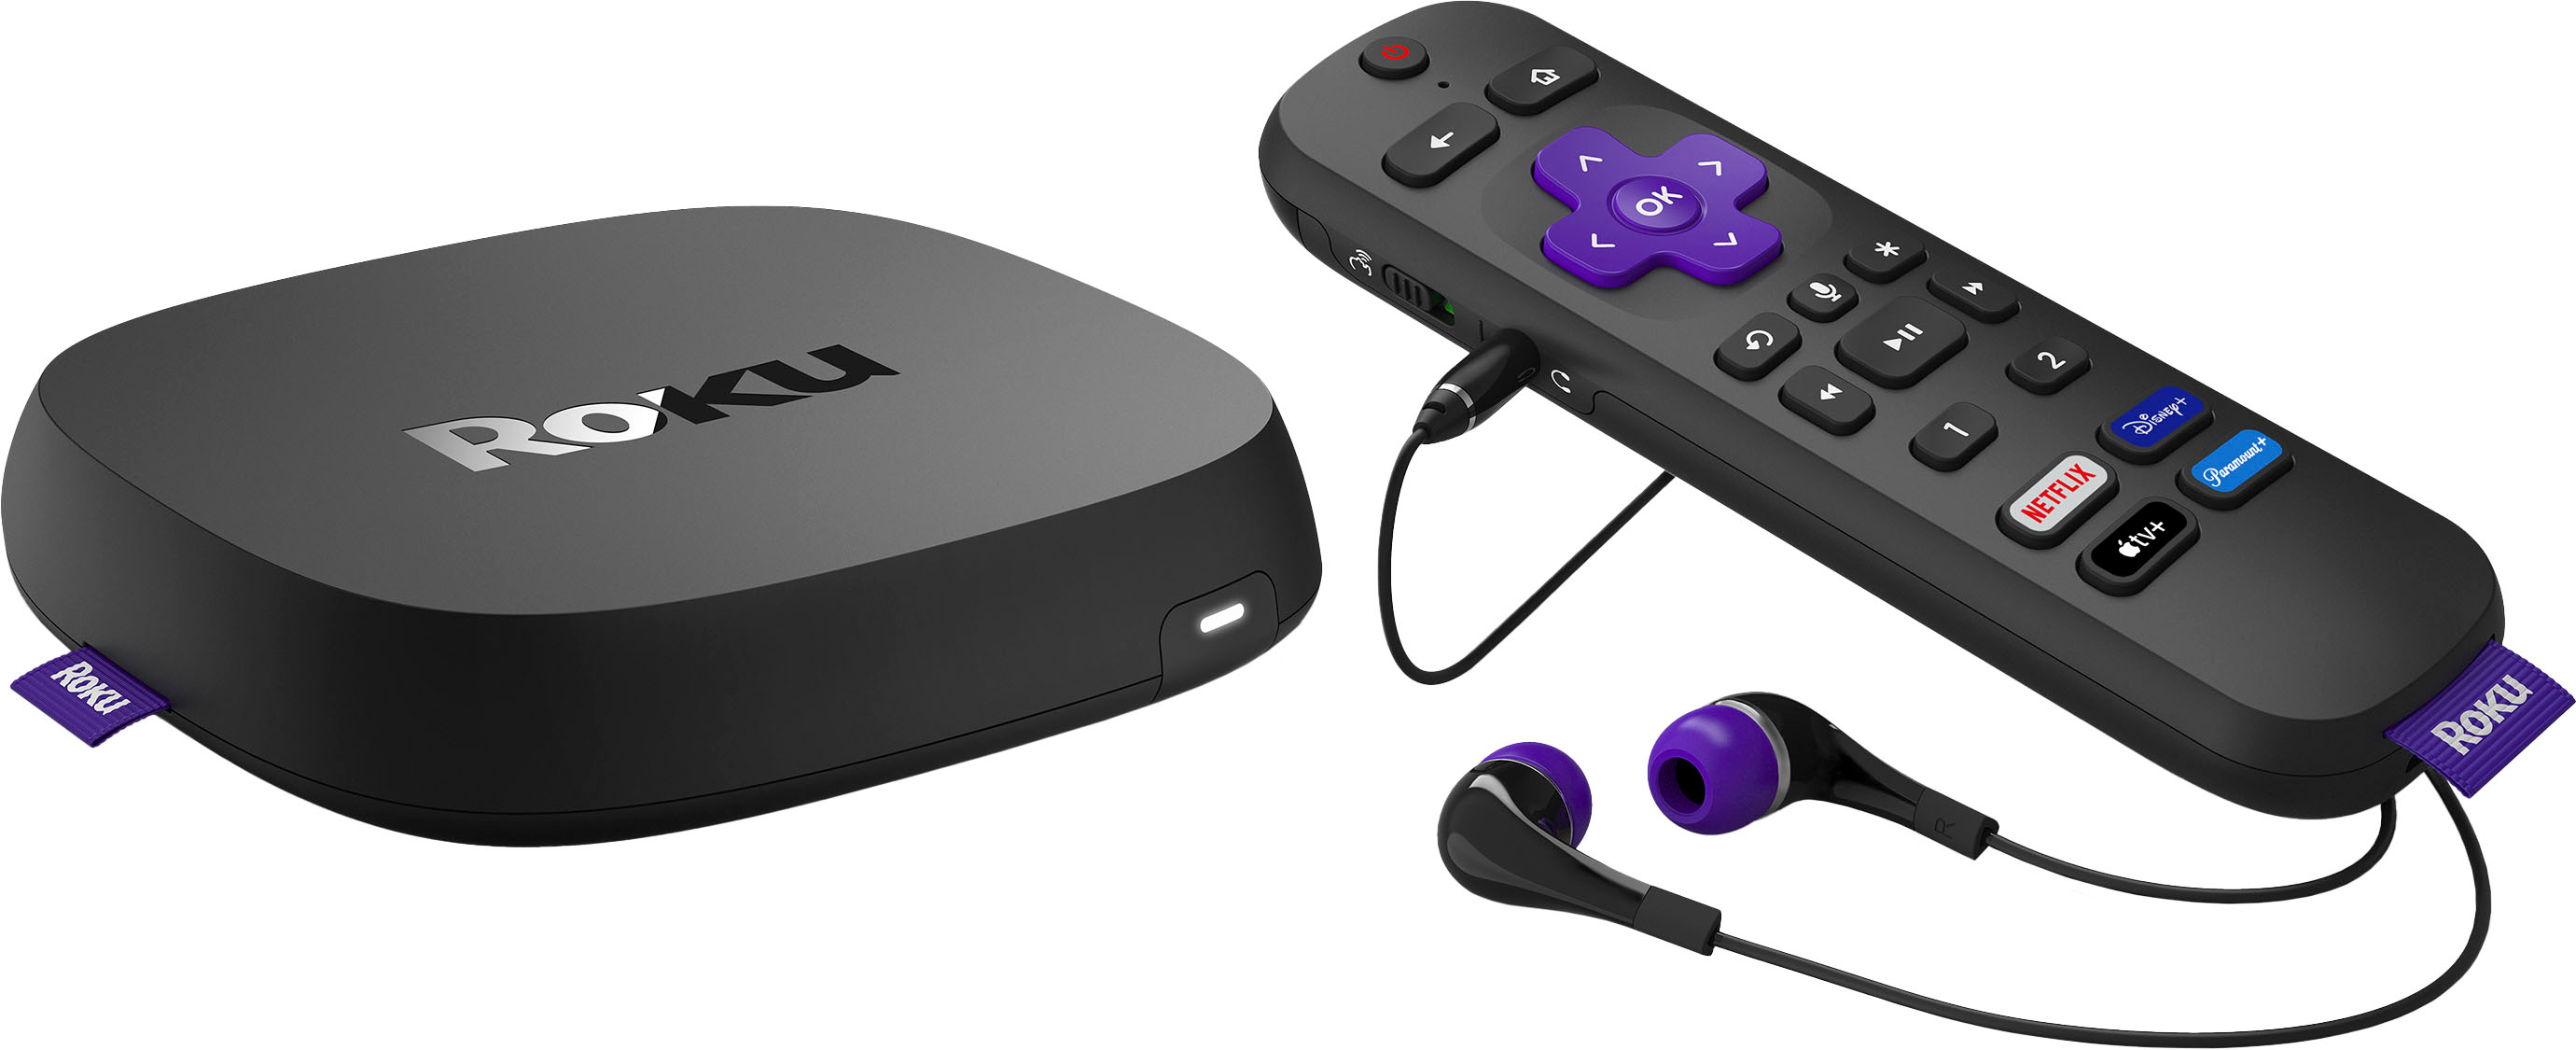 Roku Announces Roku Pro Series TVs, Designed and Engineered to Elevate the  Streaming Experience